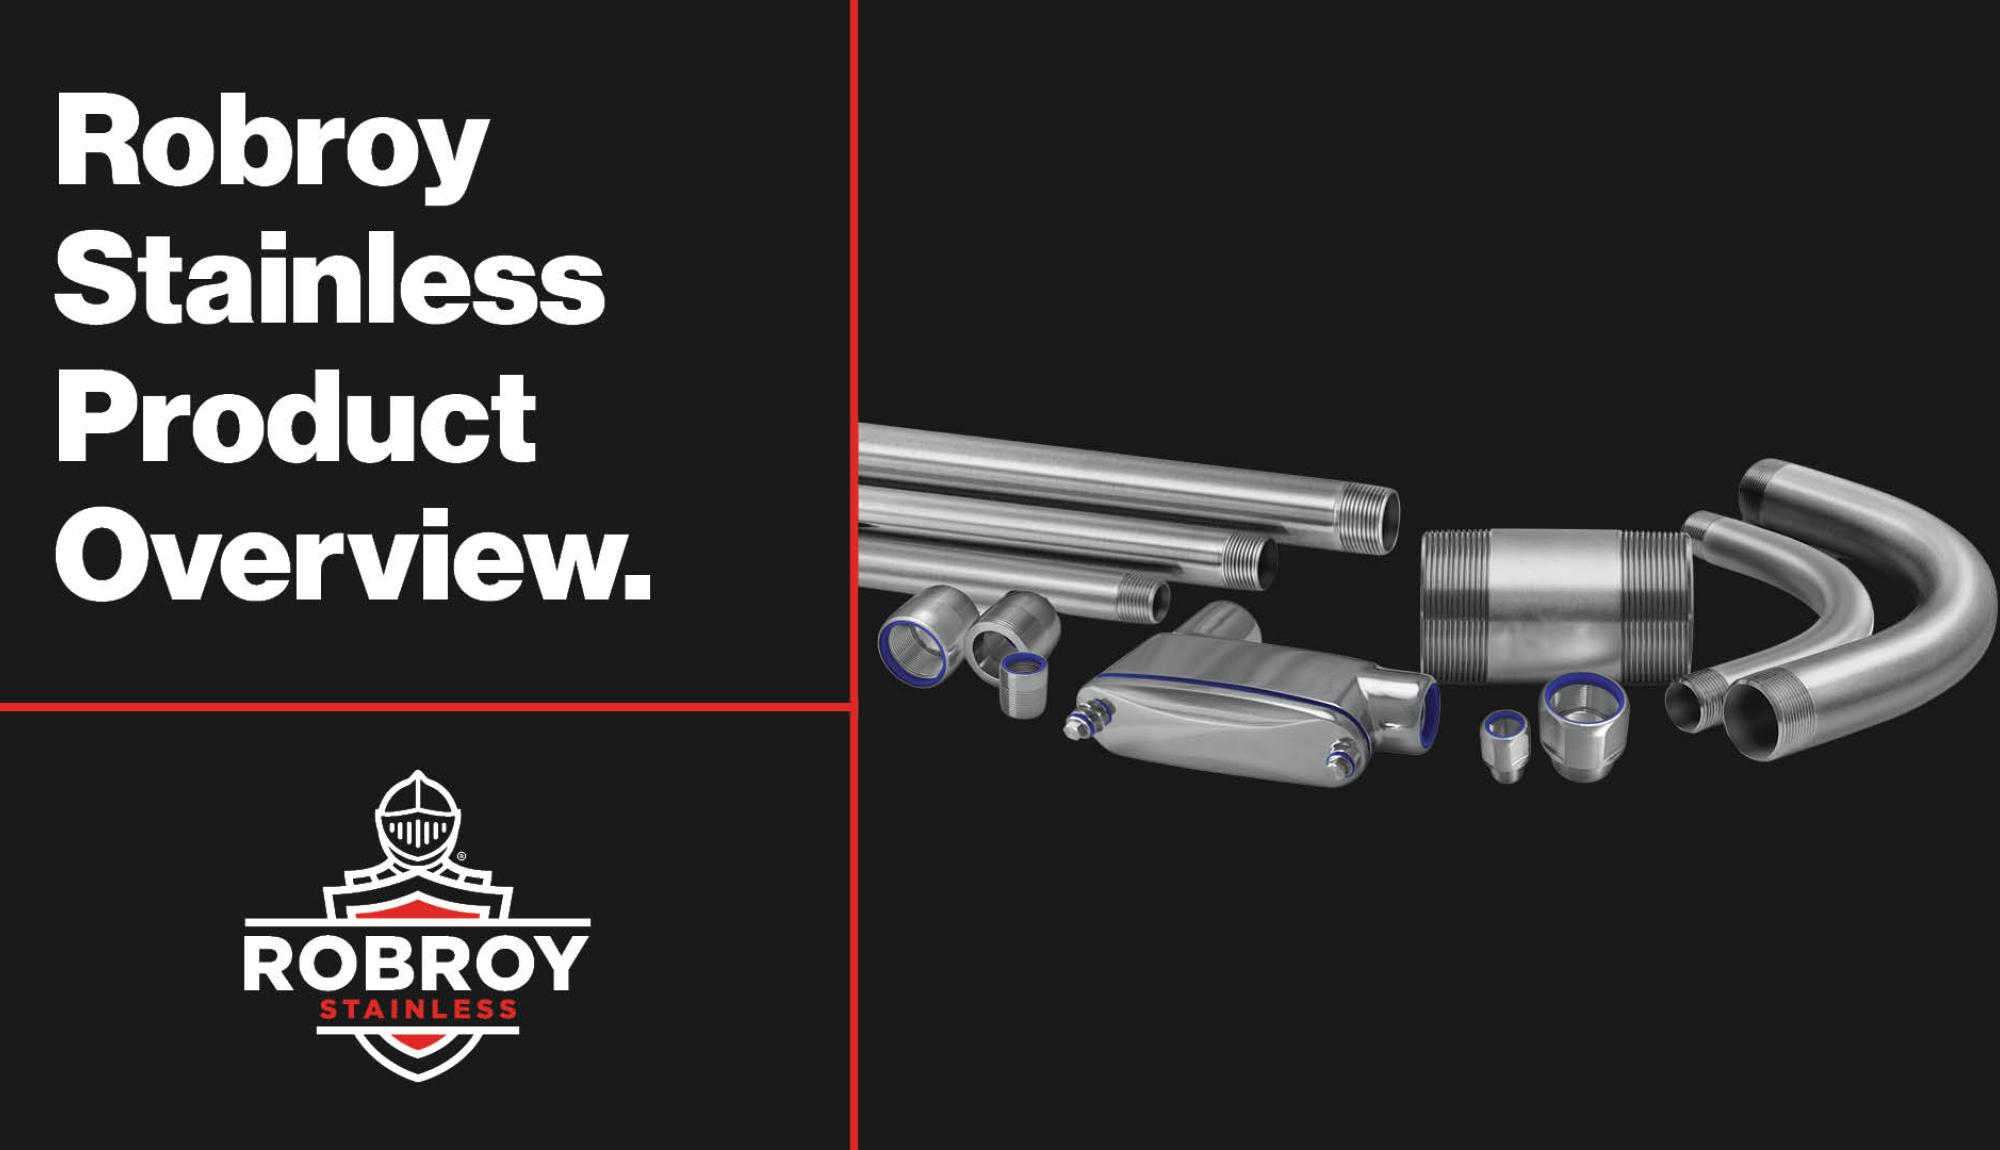 Robroy Stainless Product Overview